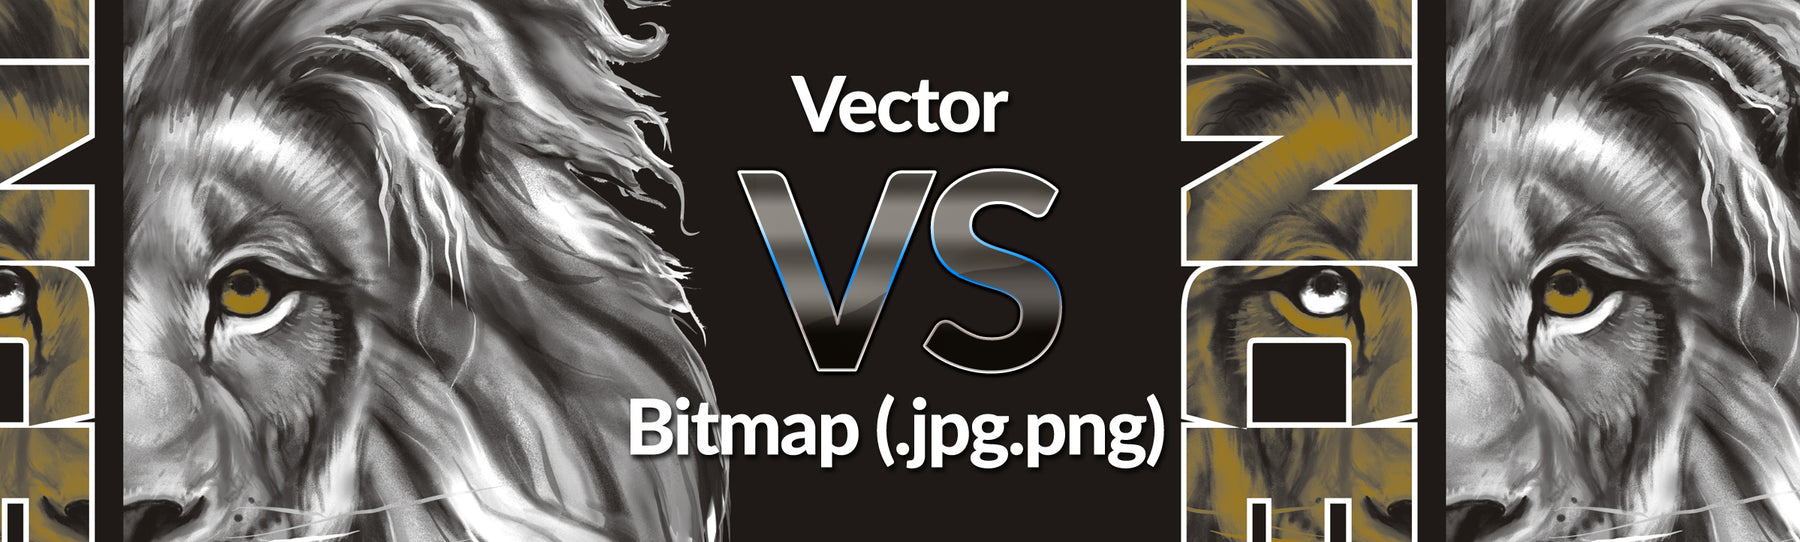 What is a Vector image?